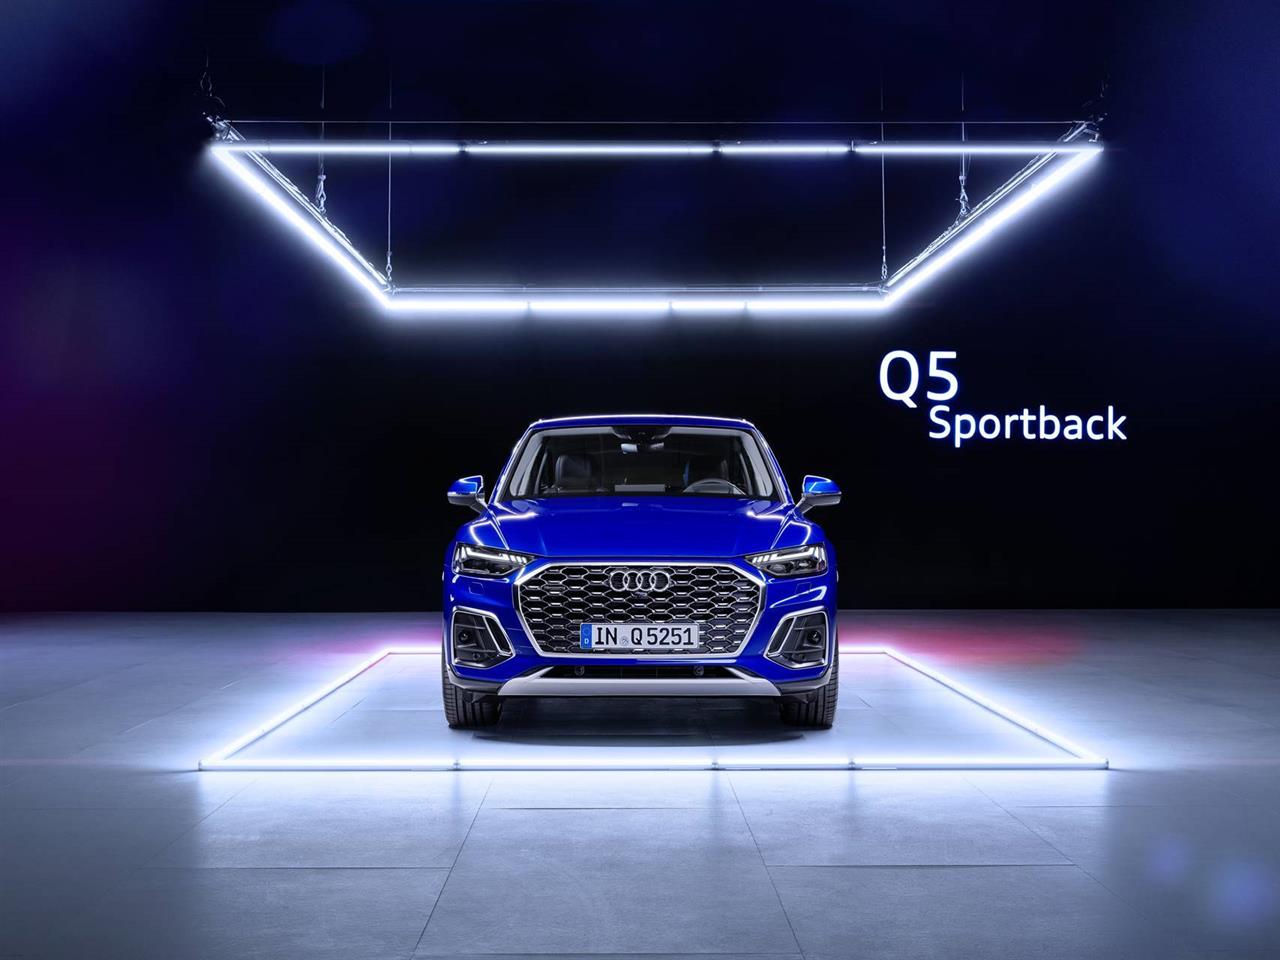 2021 Audi Q5 Sportback Features, Specs and Pricing